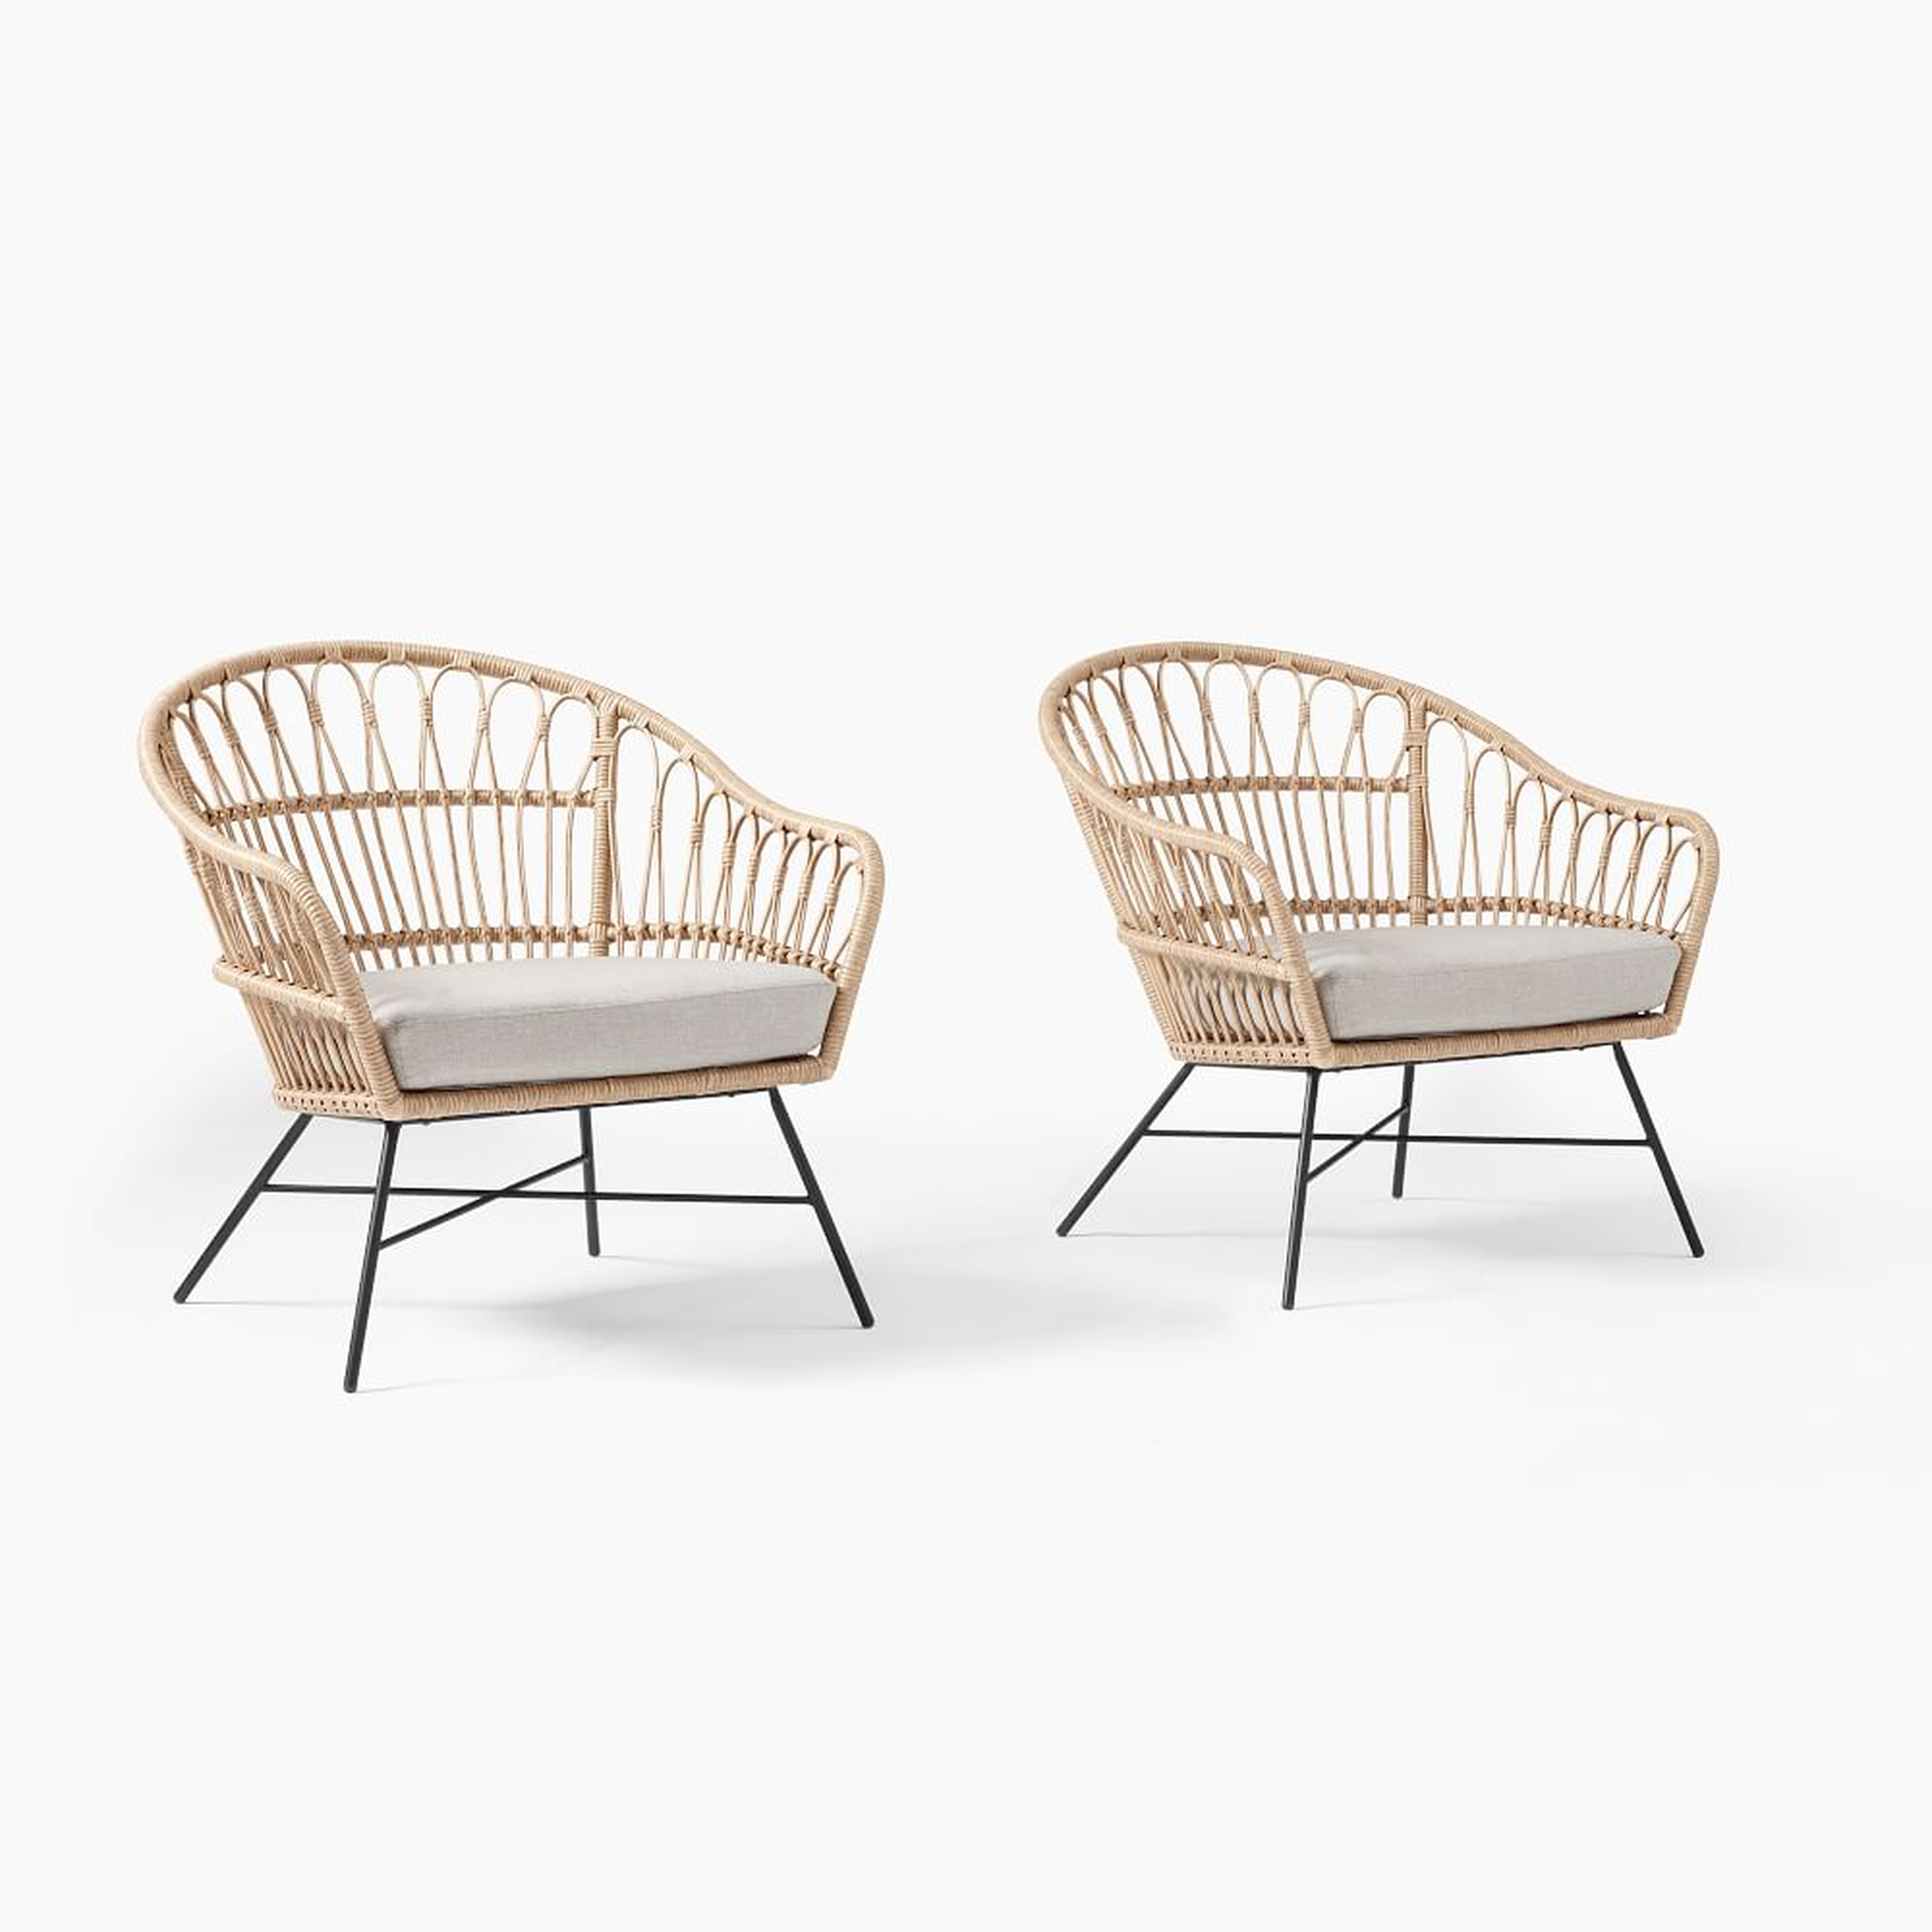 Palma Rattan Lounge Chair Natural Rattan Lounge Chairs, Set of 2 - West Elm